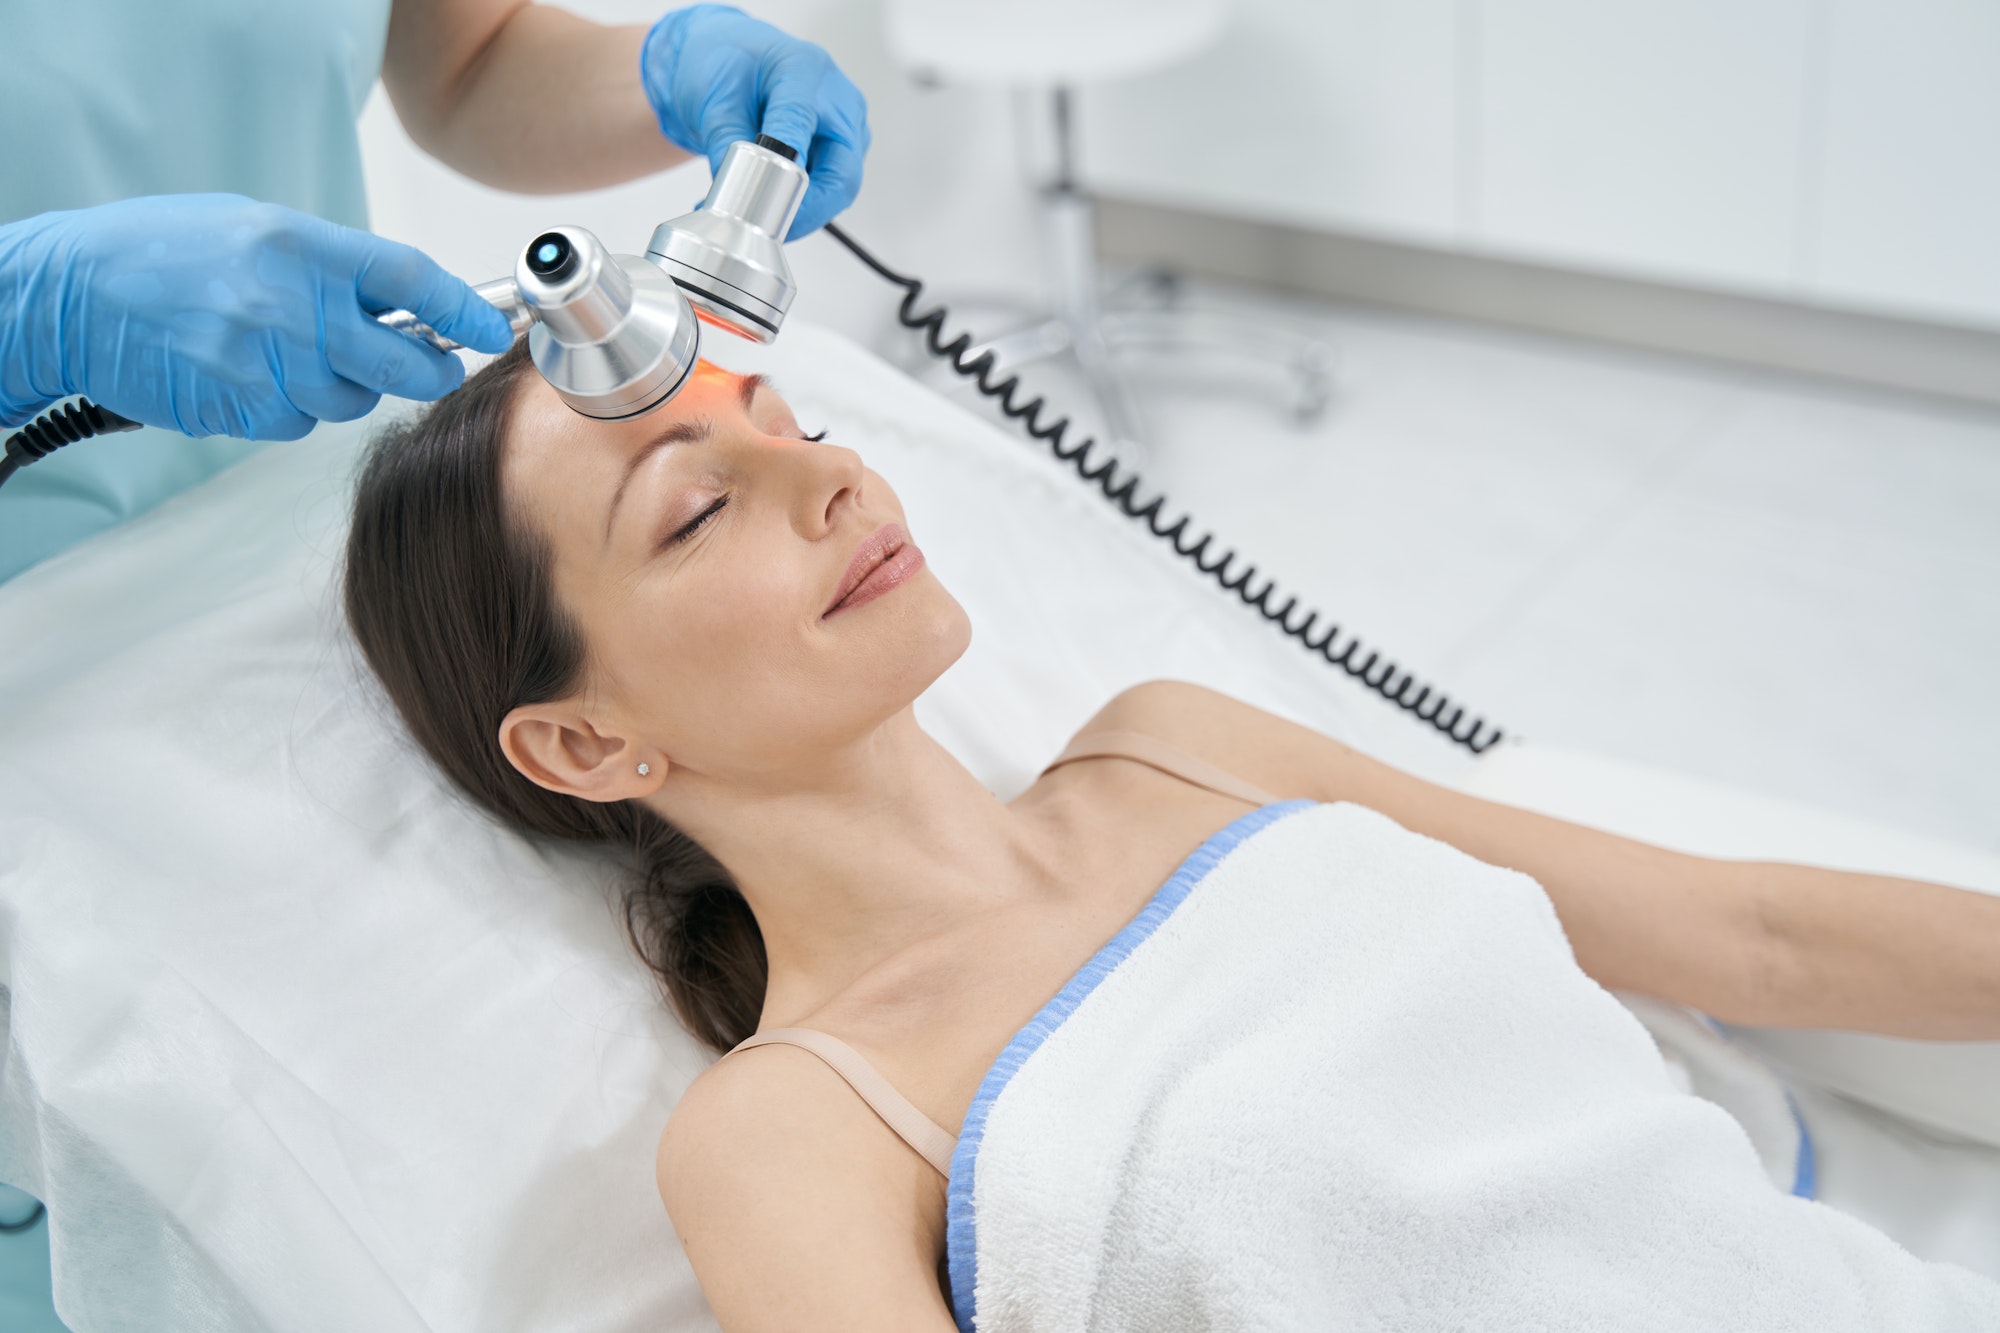 Woman receiving radiofrequency facial treatment in clinic